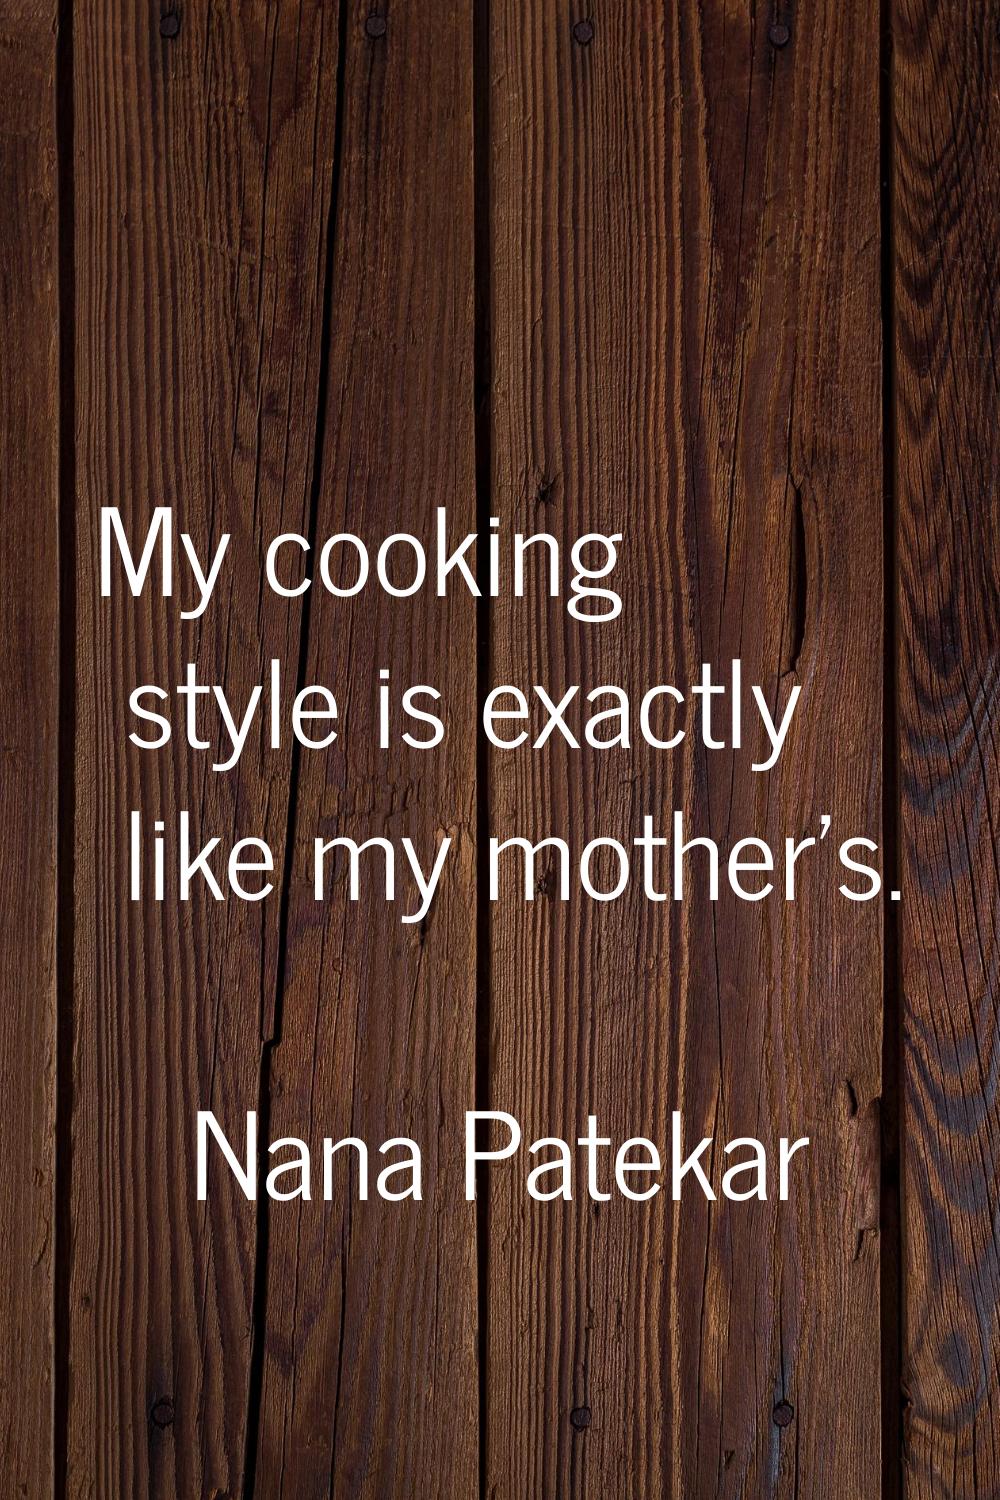 My cooking style is exactly like my mother's.